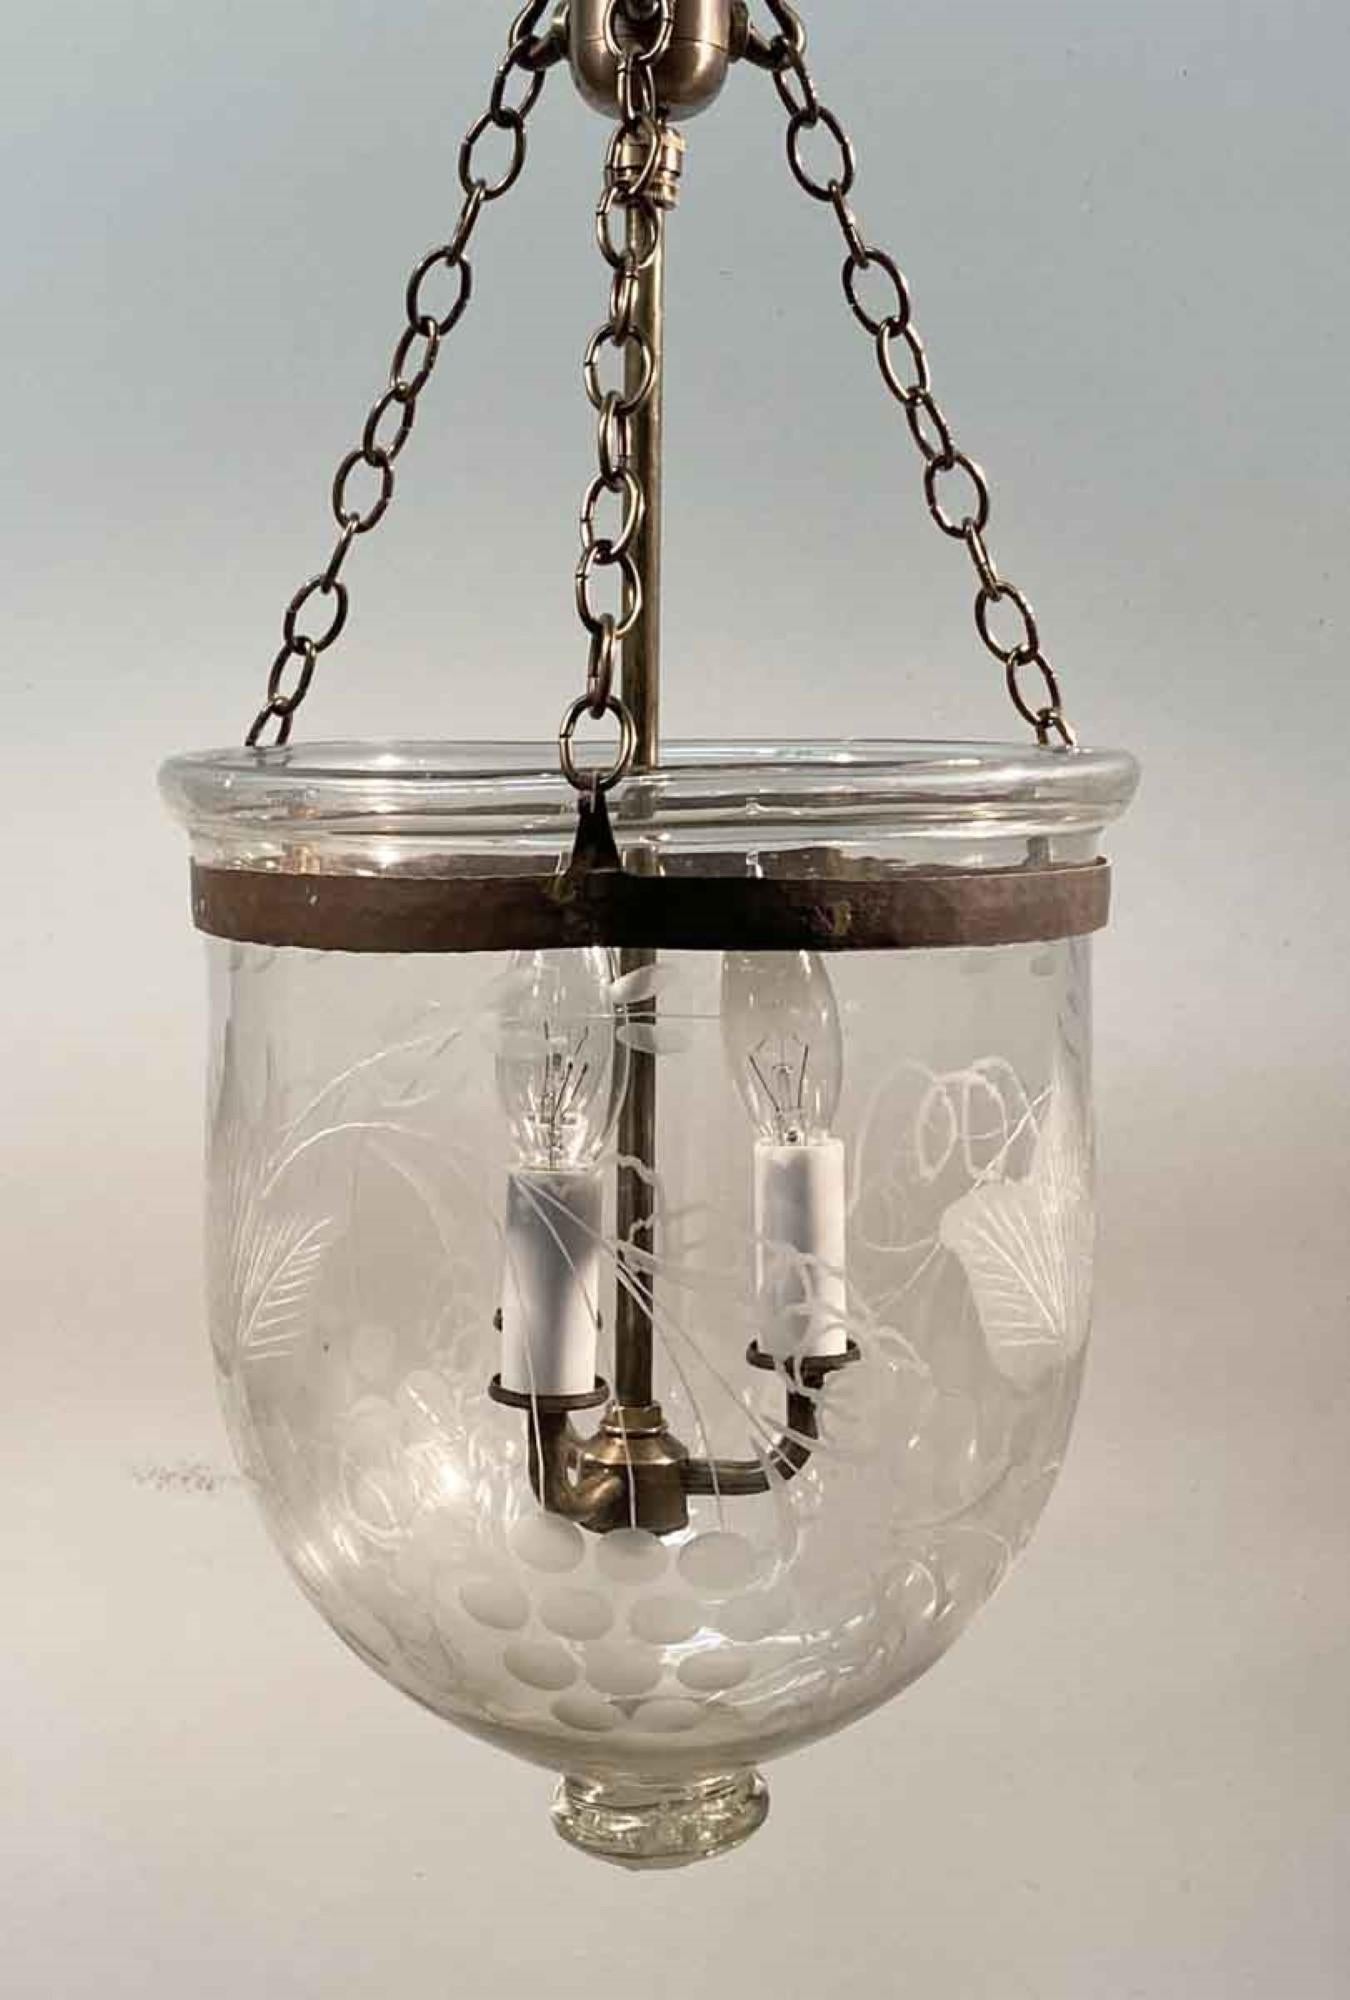 English hand blown glass bell jar lantern with etched floral decorative details, newly made brass hardware and three candelabra lights. This can be seen at our 400 Gilligan St location in Scranton. PA.